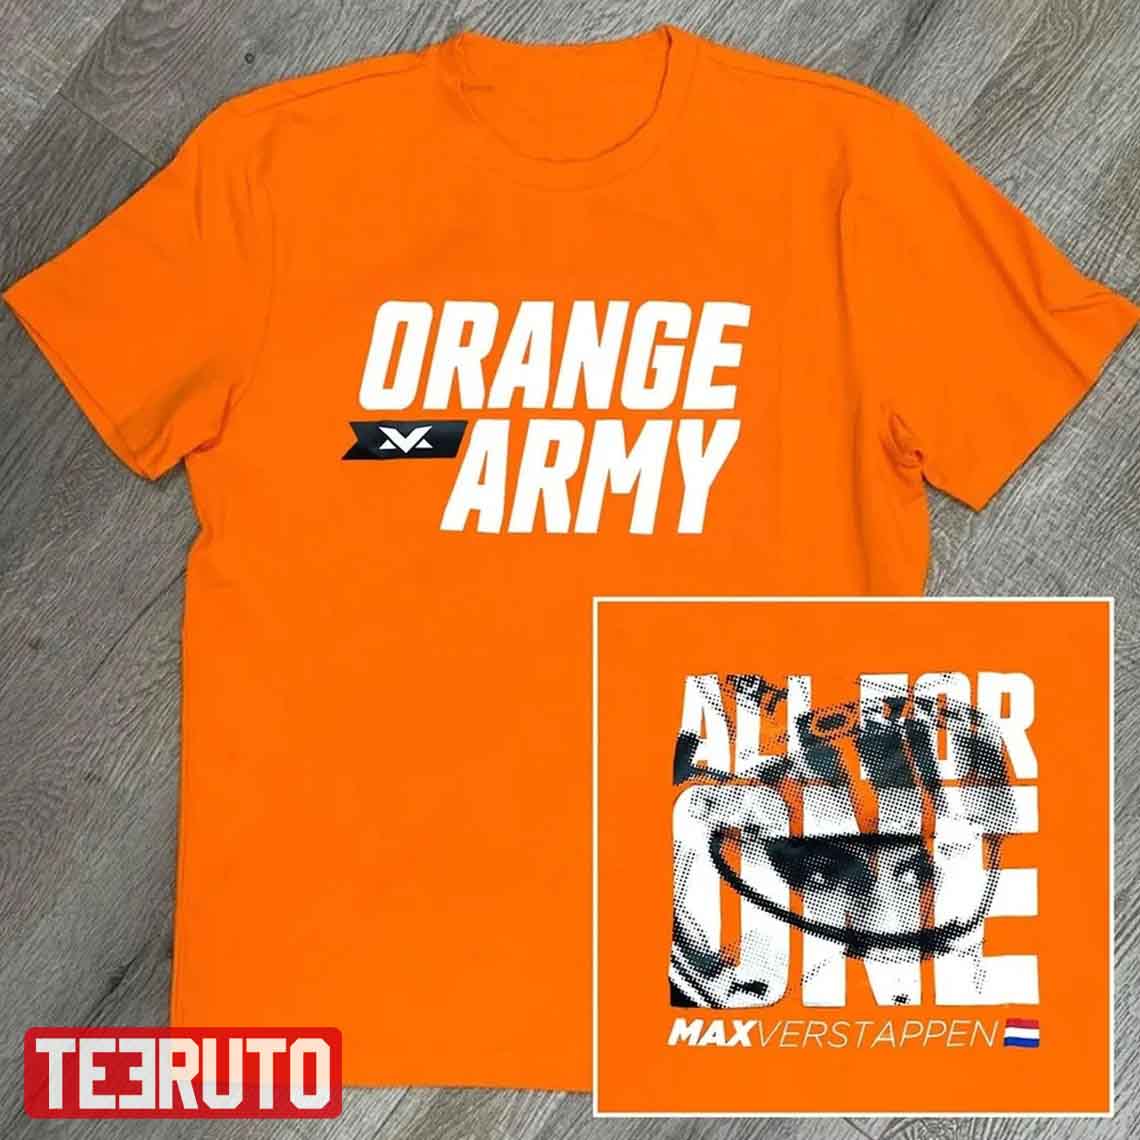 2022 F1 Max Verstappen Orange Army All For One Unisex T-shirt